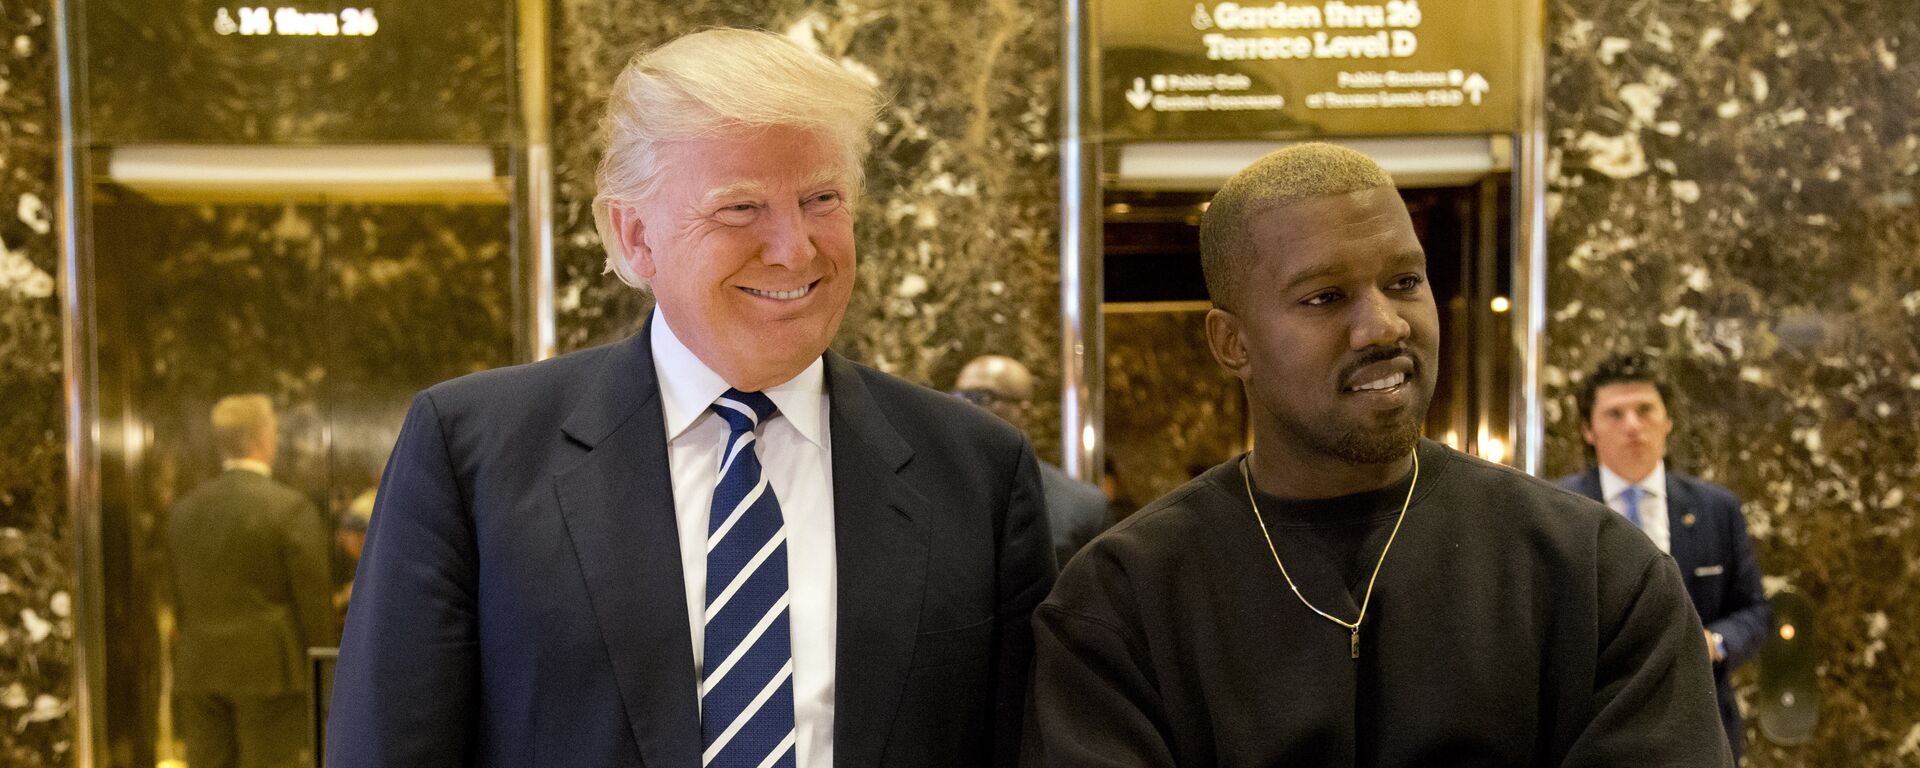 President-elect Donald Trump, left, and Kanye West pose for a picture in the lobby of Trump Tower in New York, Tuesday, Dec. 13, 2016 - Sputnik International, 1920, 18.10.2022